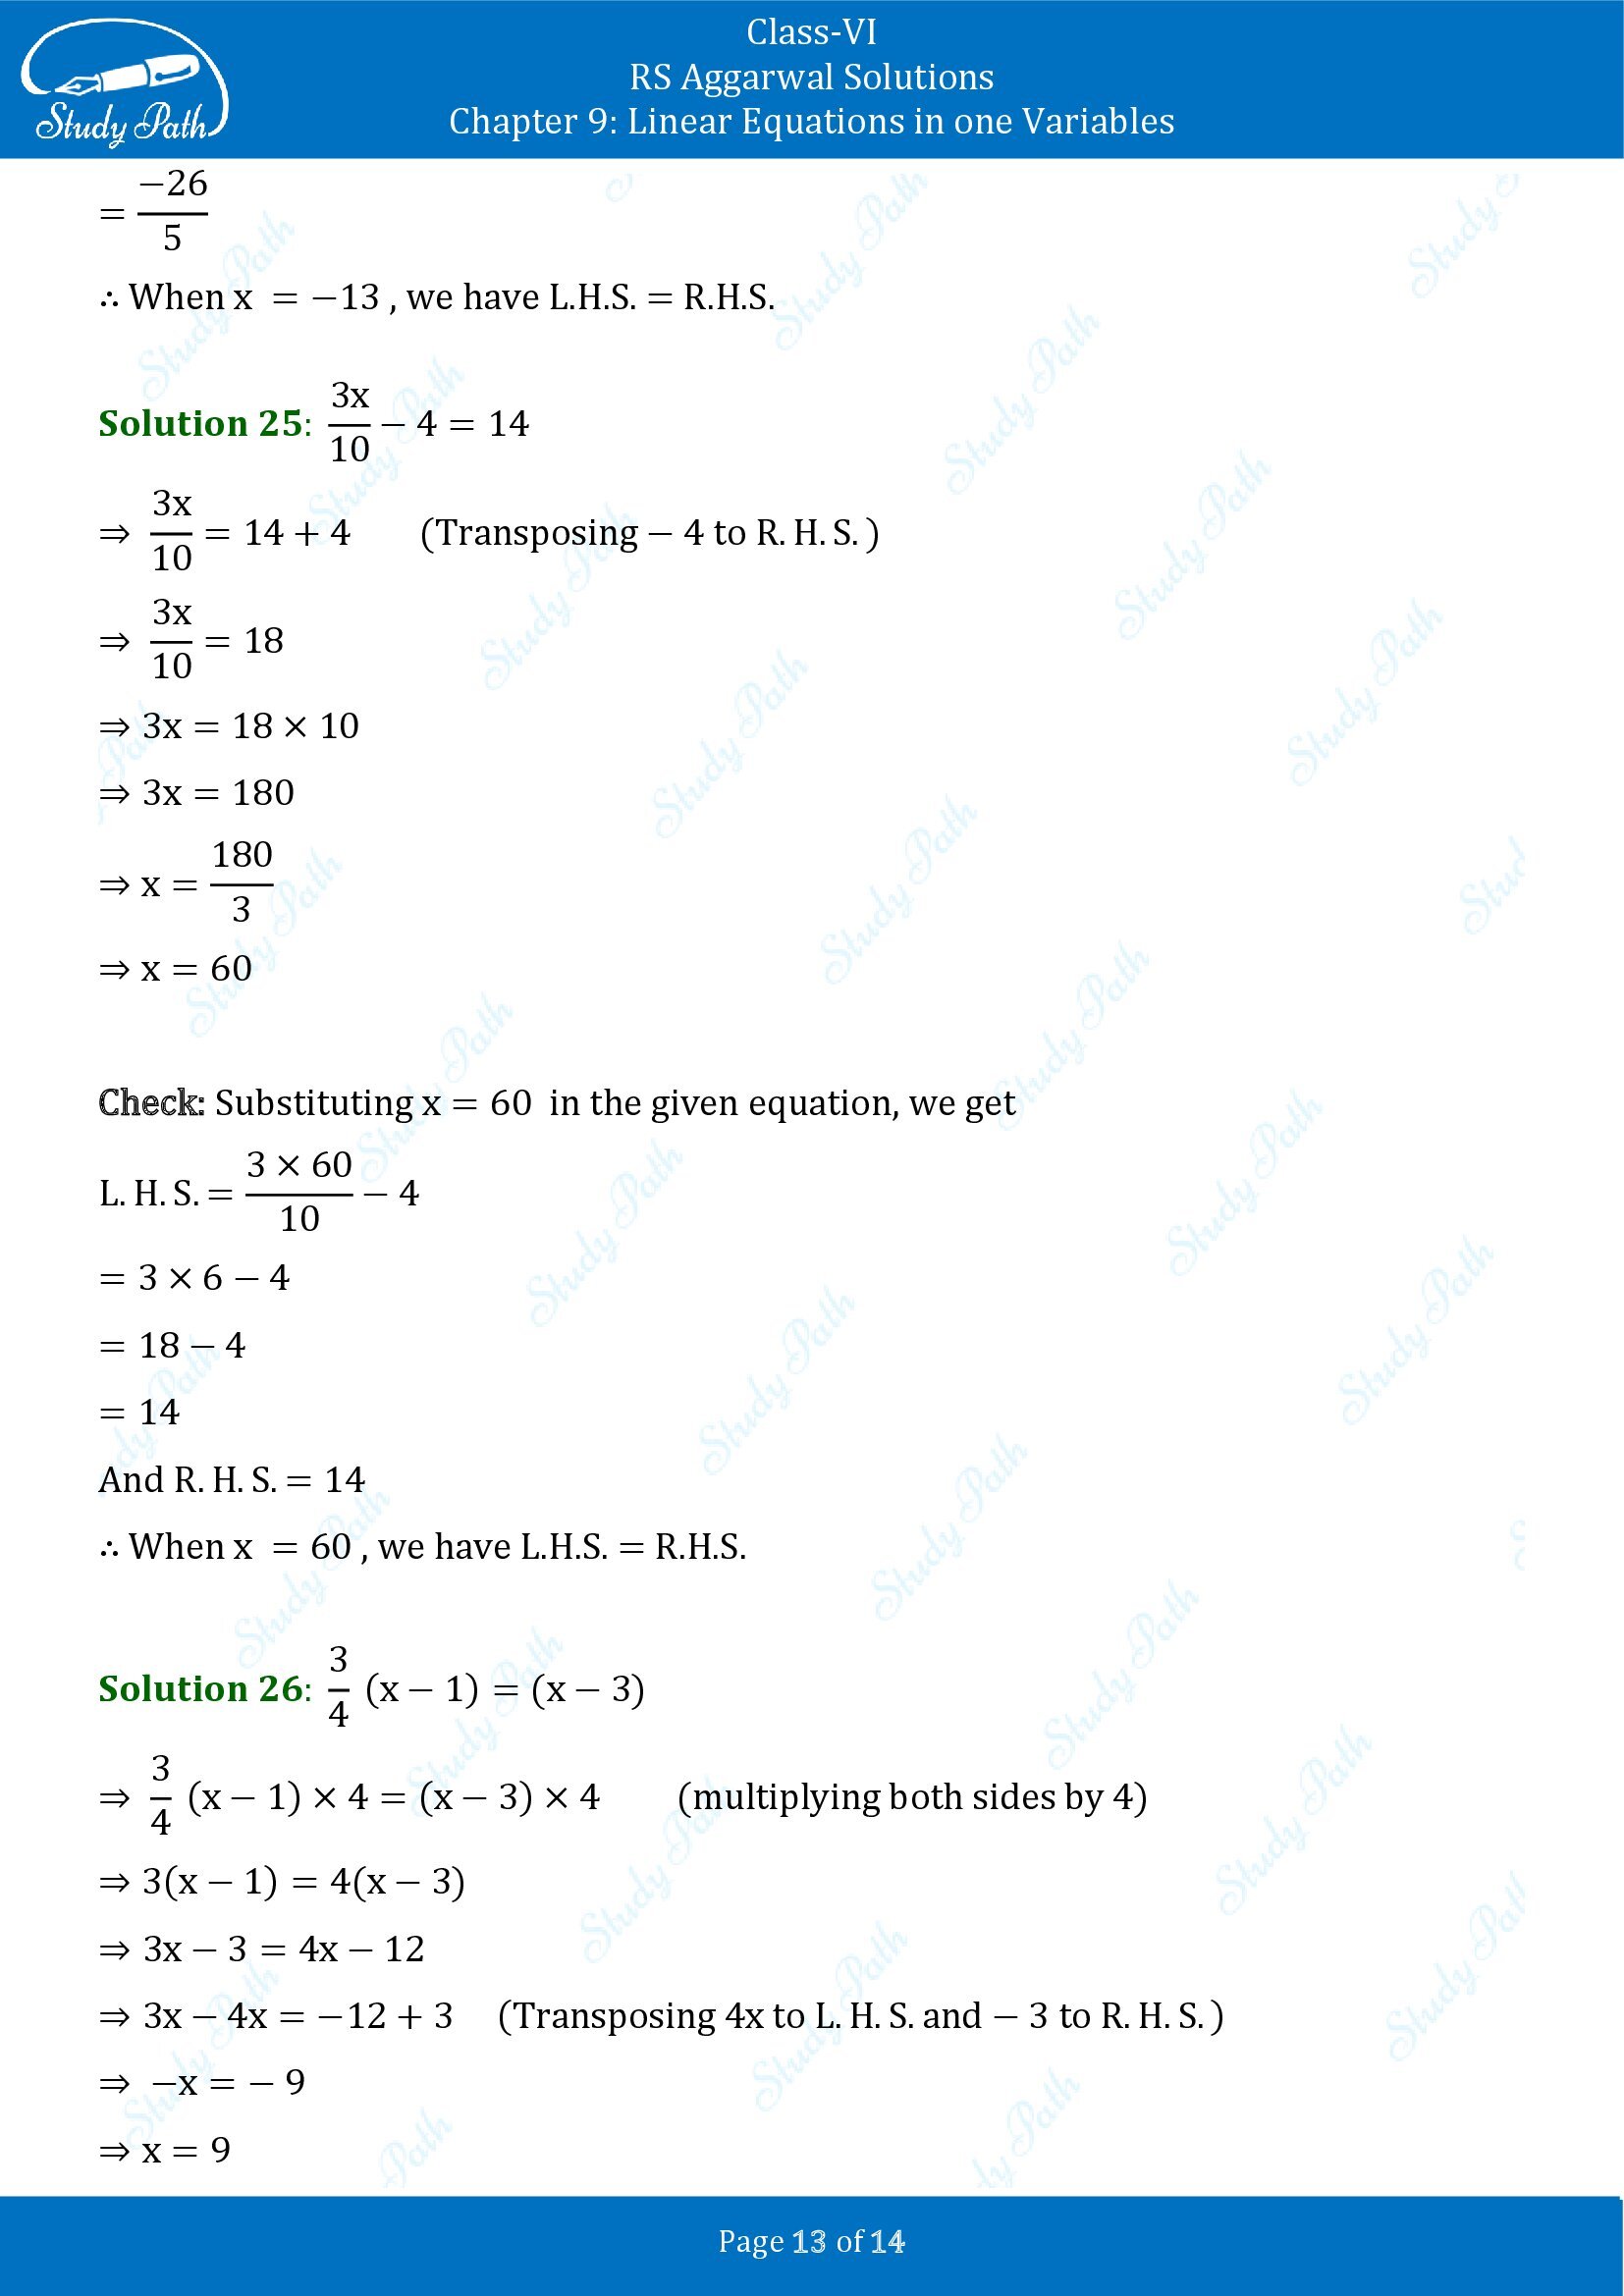 RS Aggarwal Solutions Class 6 Chapter 9 Linear Equations in One Variable Exercise 9B 00013